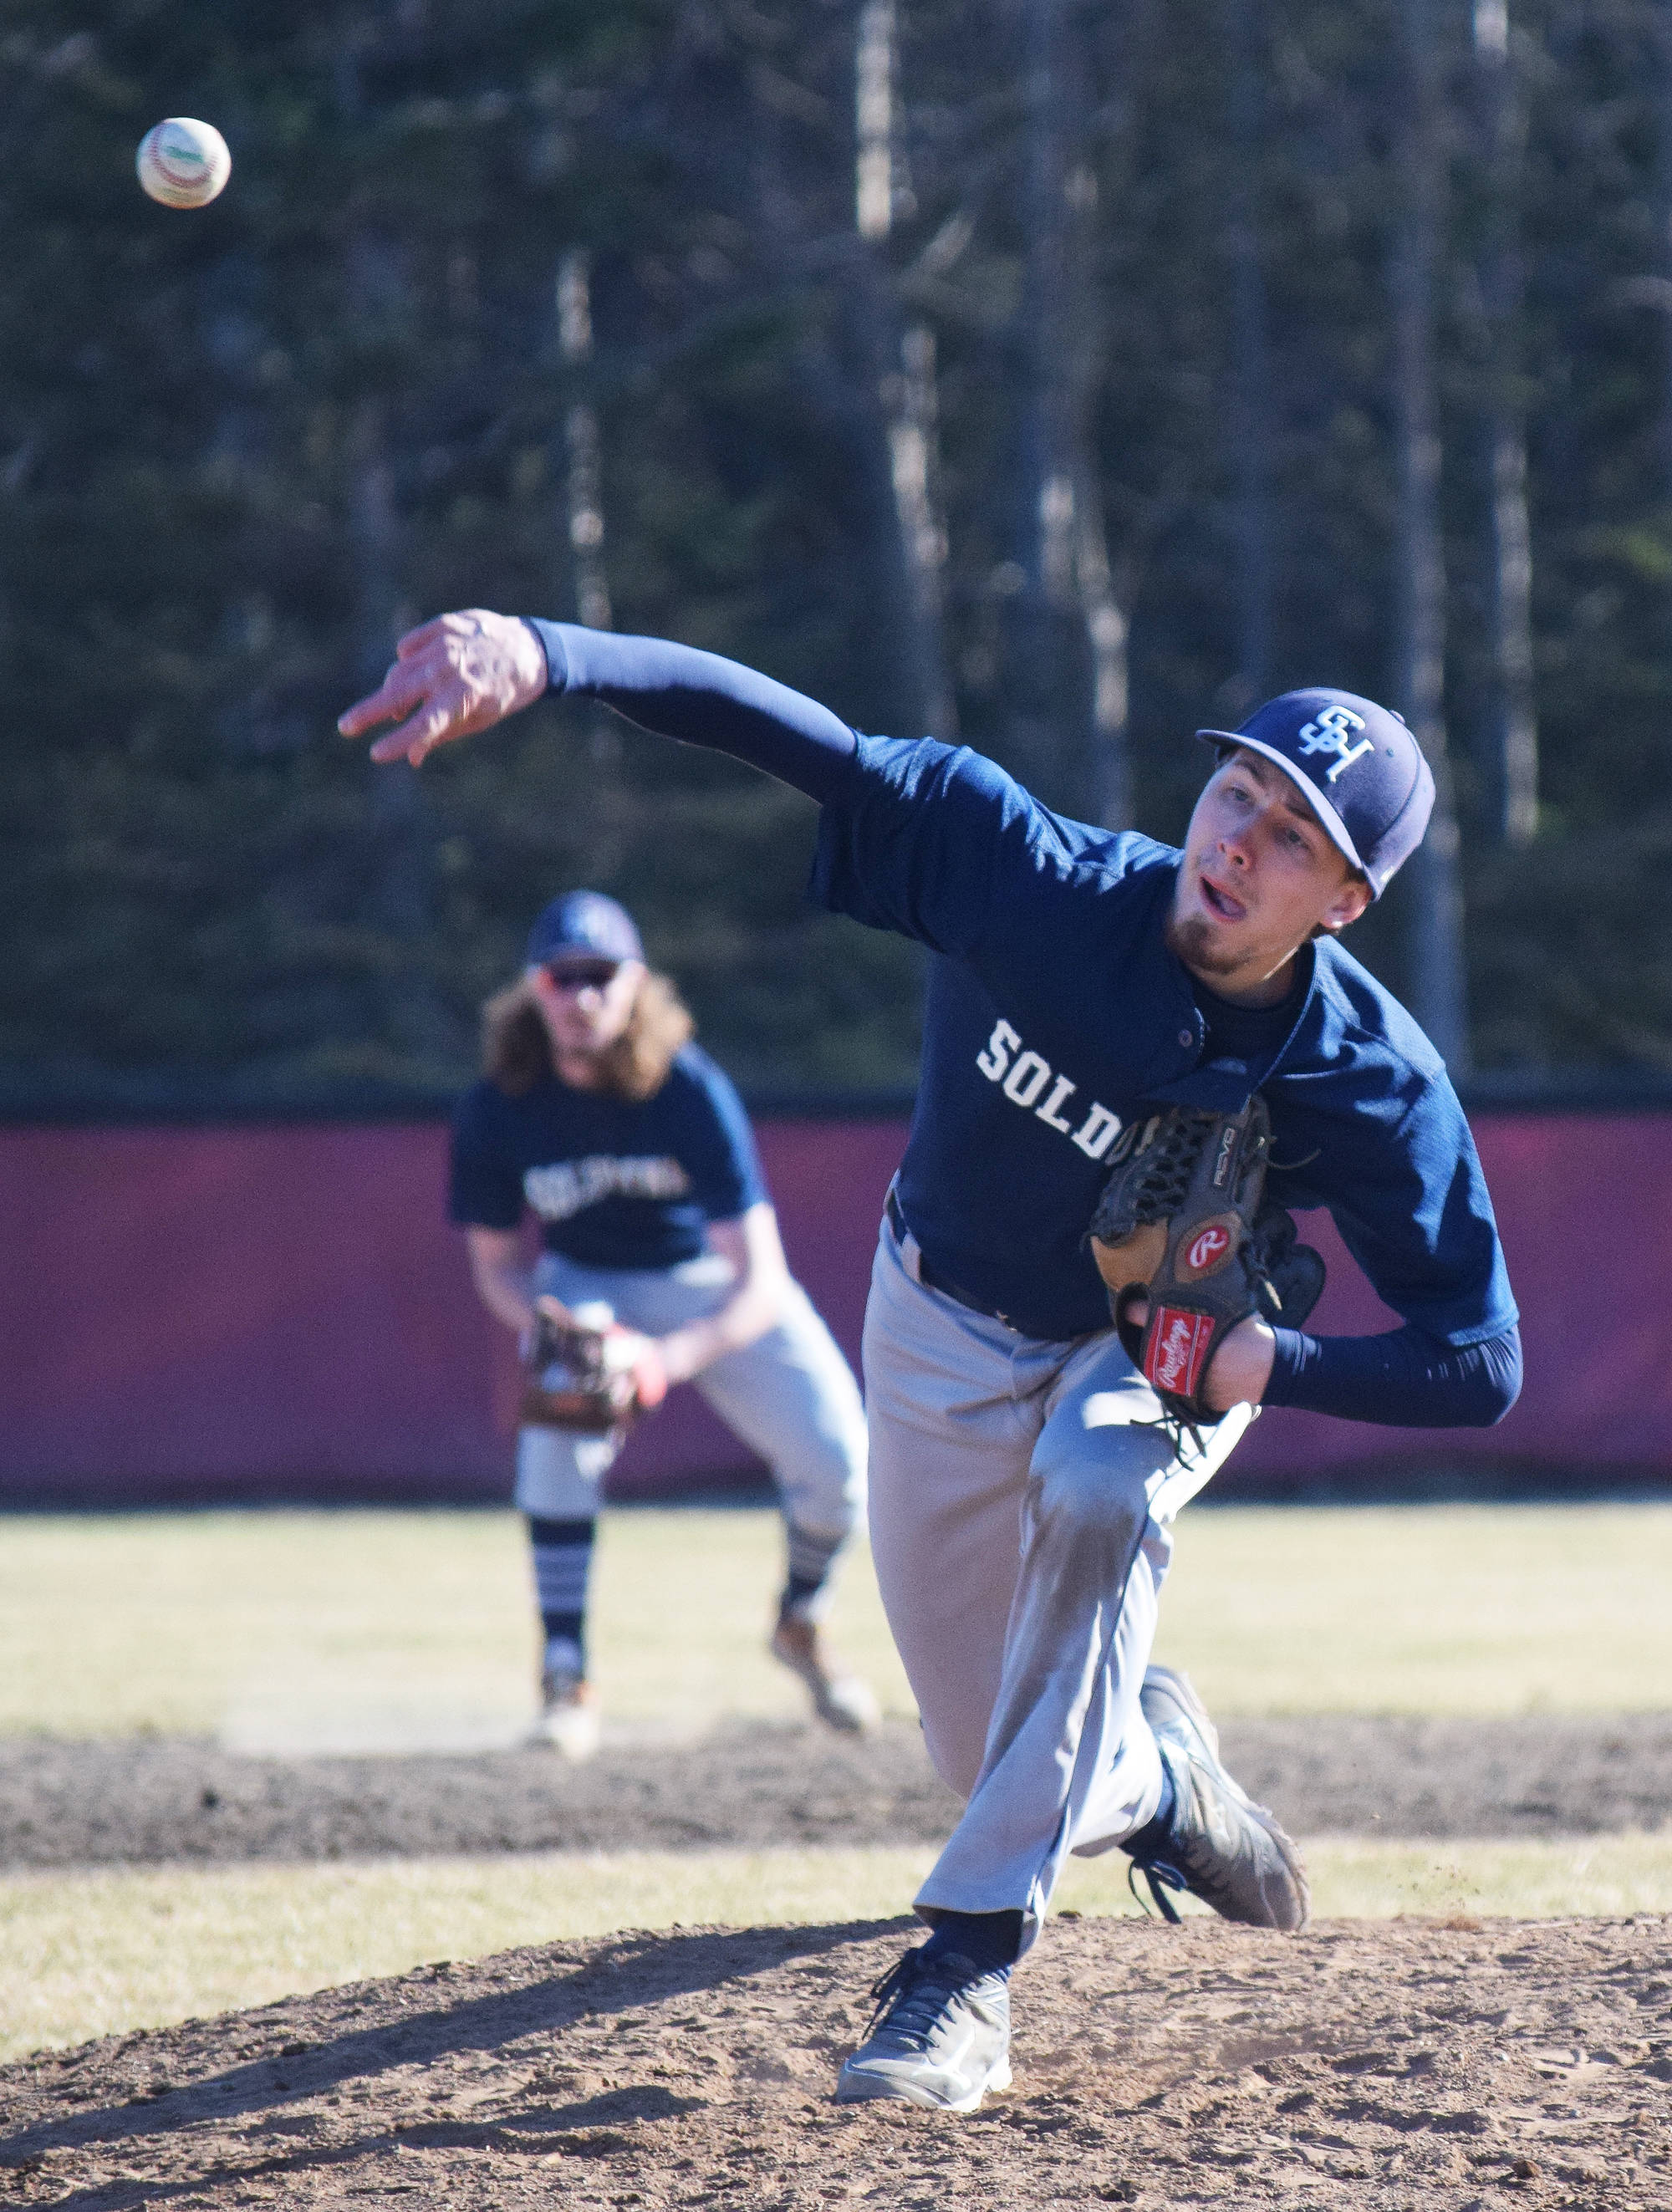 Soldotna starter Caleb Spence delivers a pitch to a Kenai Central batter Wednesday evening at the Kenai Little League Fields. (Photo by Joey Klecka/Peninsula Clarion)